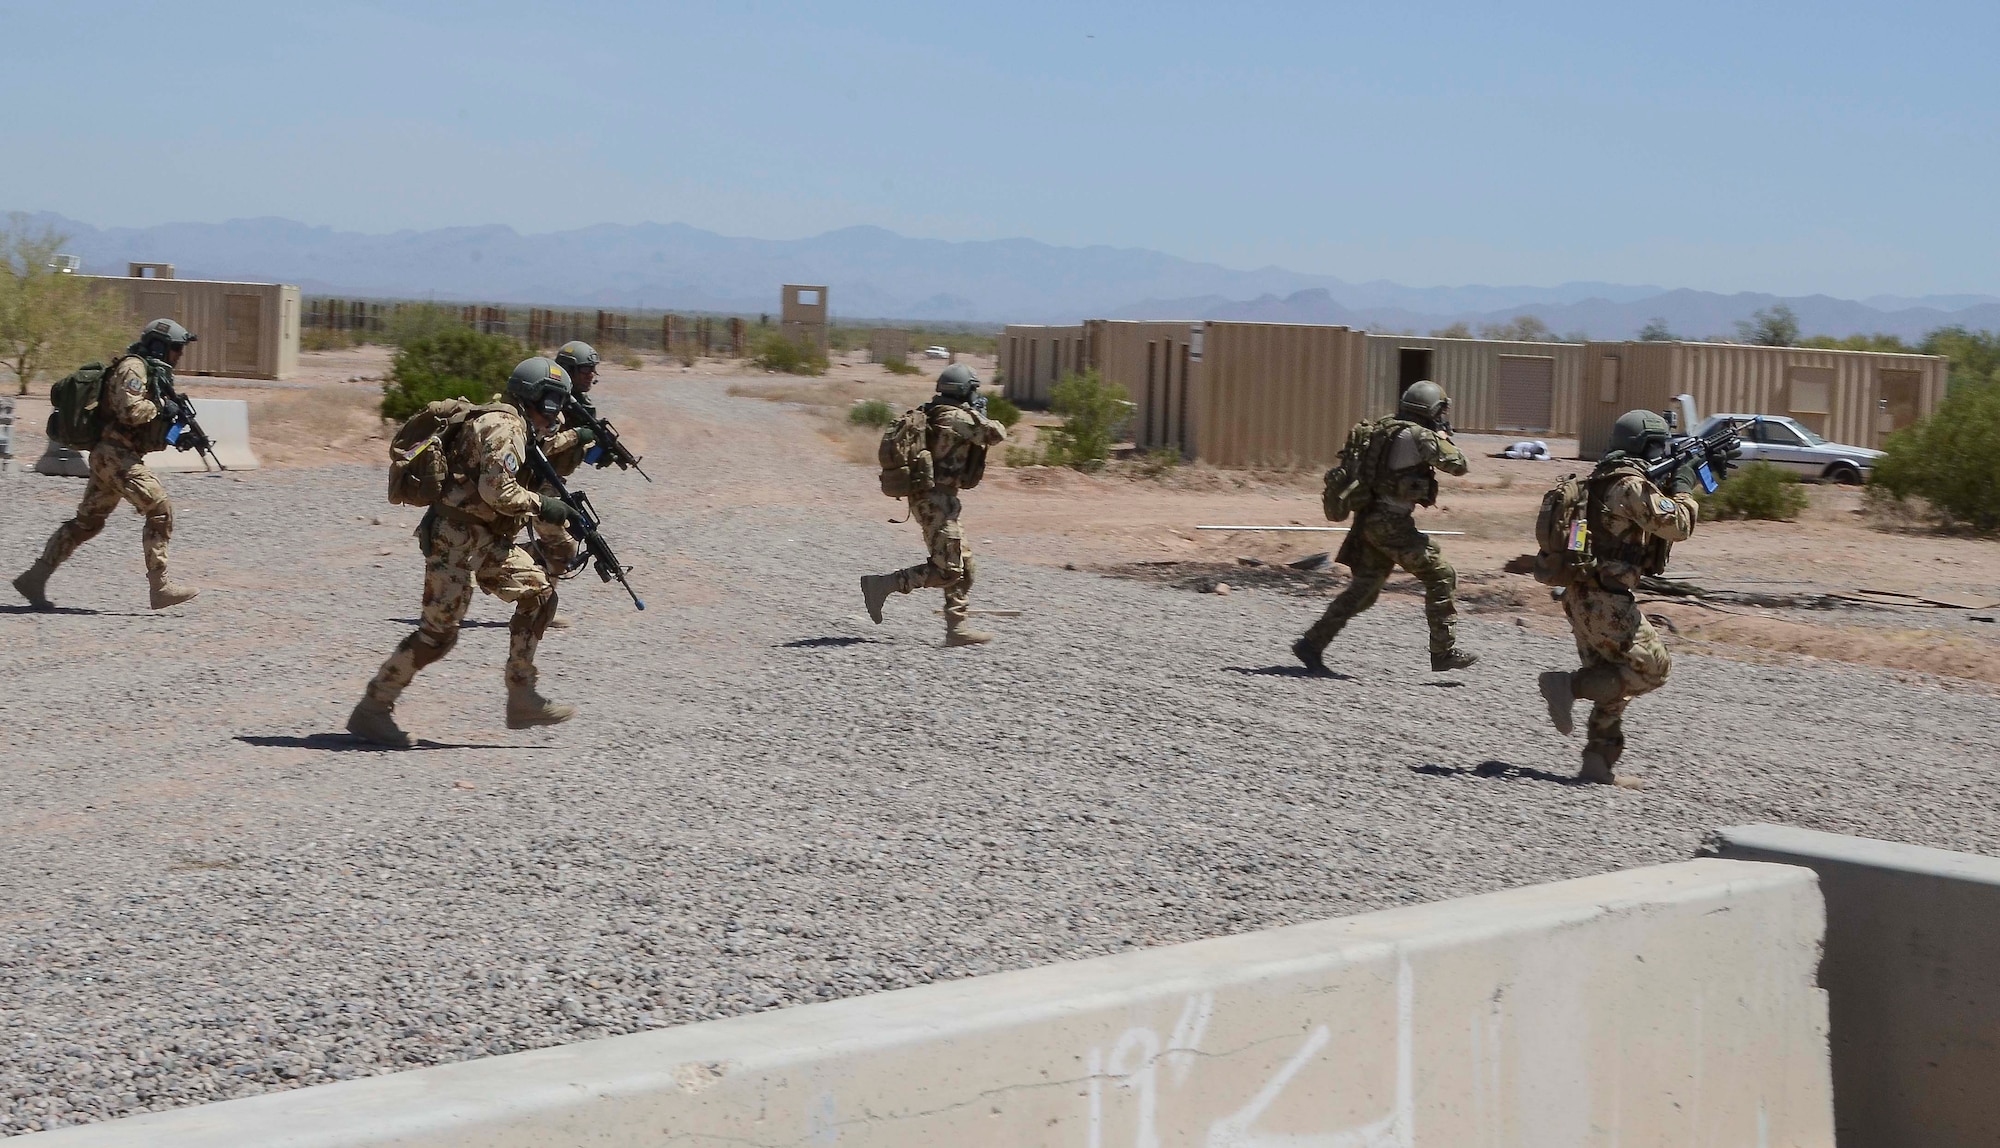 Members  of a Multinational Combat Search and Rescue team sprint to a forward location at  training site during a training mission in Exercise ANGEL THUNDER on May 16, 2014 at the Florence Military Reservation, Ariz. ANGEL THUNDER 2014 is the largest and most realistic joint service, multinational, interagency combat search and rescue exercise designed to provide training for personnel recovery assets using a variety of scenarios to simulate deployment conditions and contingencies. Personnel recovery forces will train through the full spectrum of personnel recovery capabilities with ground recovery personnel, air assets, and interagency teams. (U.S. Air Force photo by Staff Sgt. Adam Grant/Released)